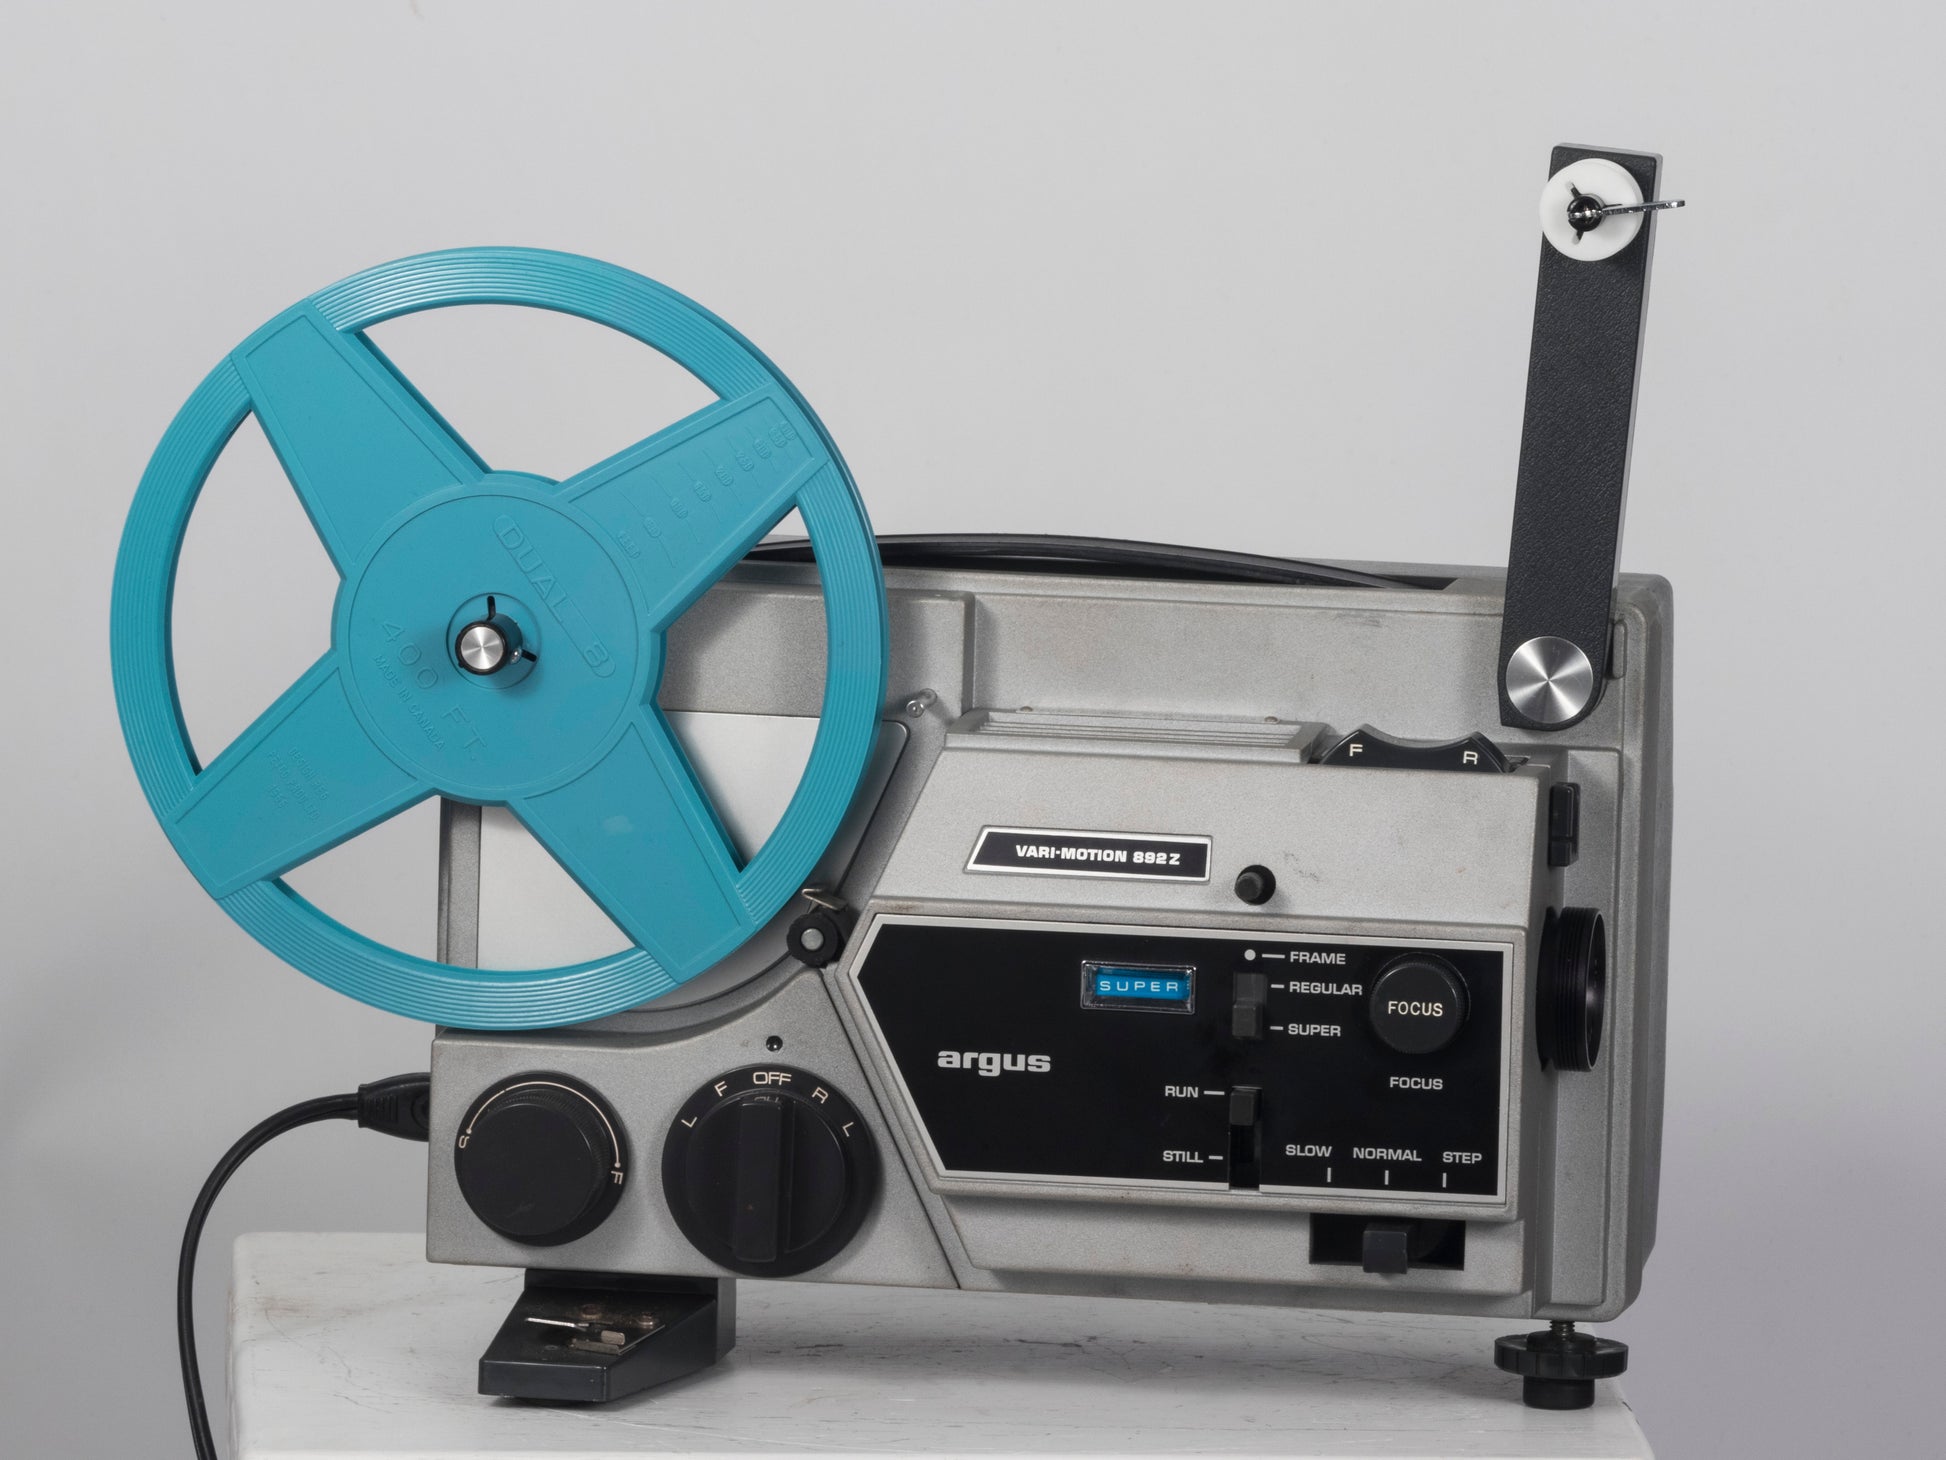 Argus Vari-Motion 892Z Dual Super 8 and 8mm shown with takeup reel